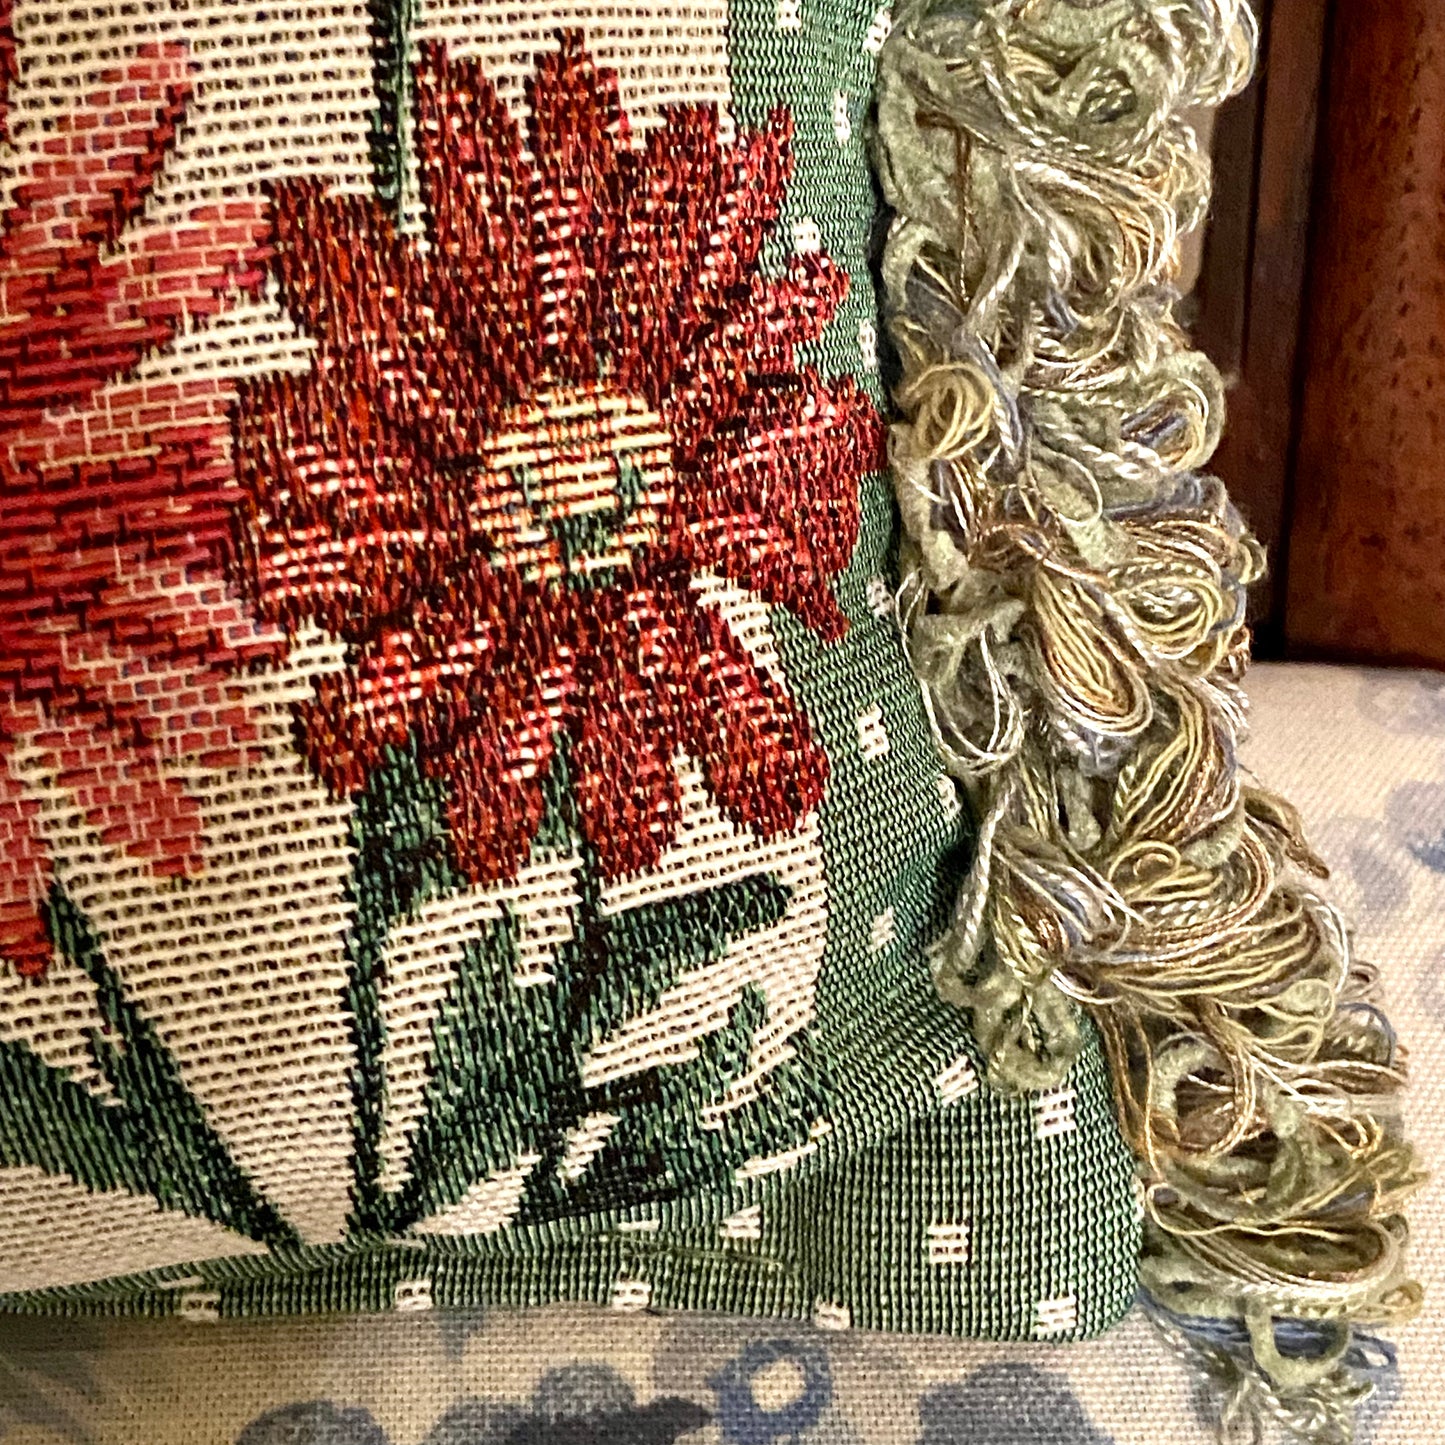 Whimsical botanical pillow for your Sister.